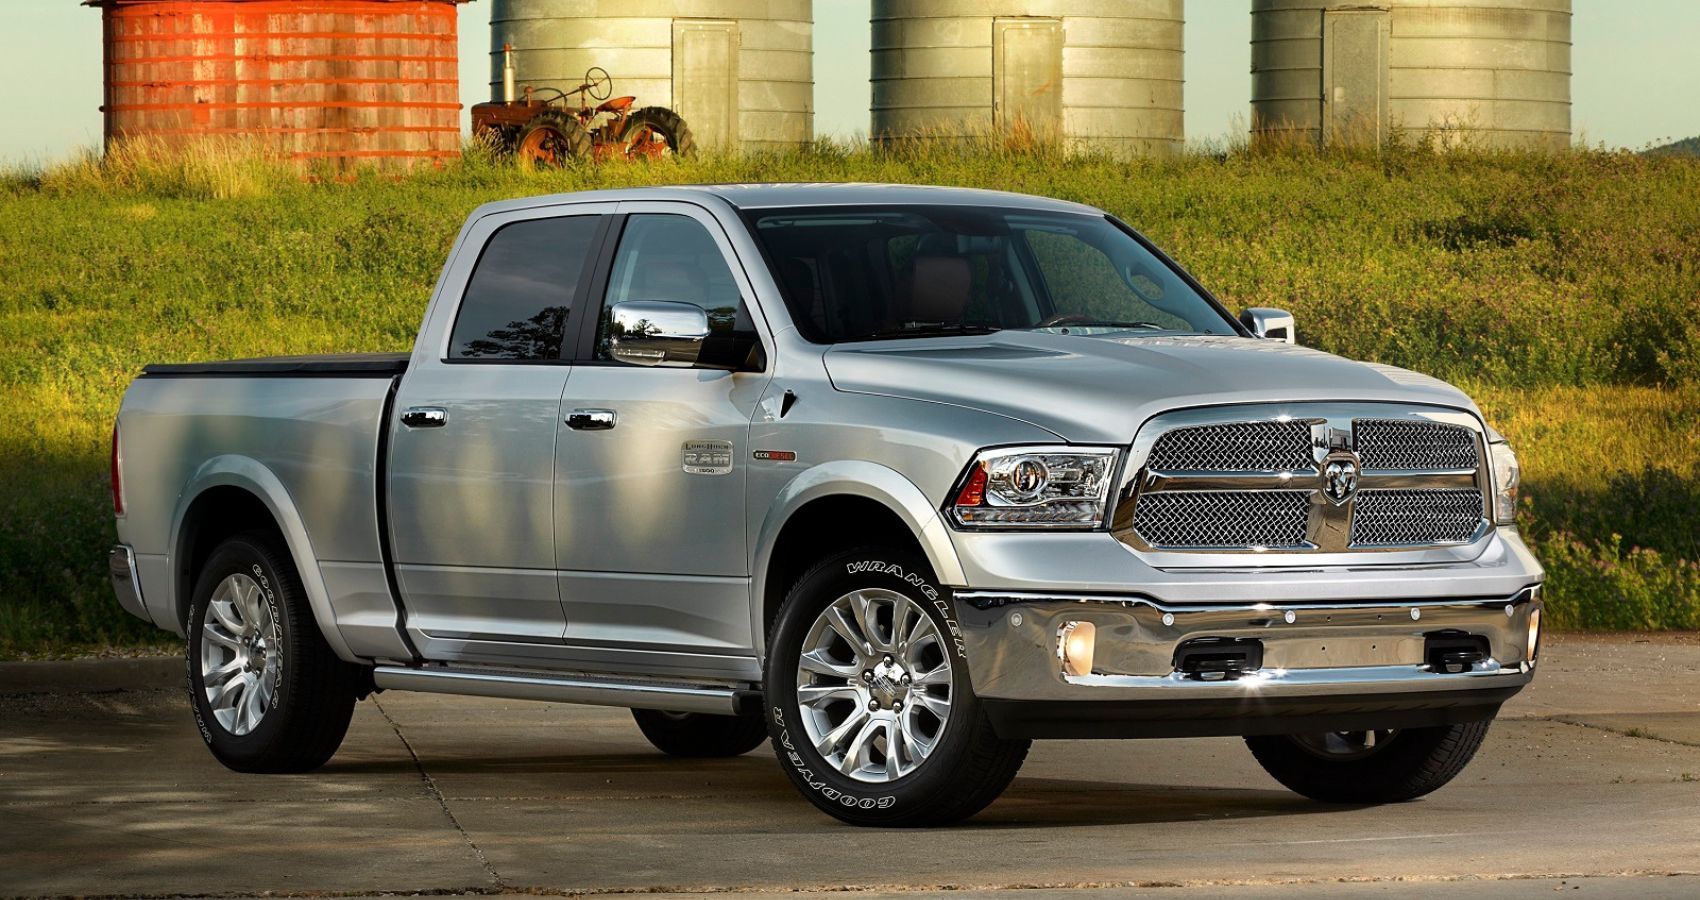 2014 Dodge Ram 1500 Silver Pickup Truck Parked